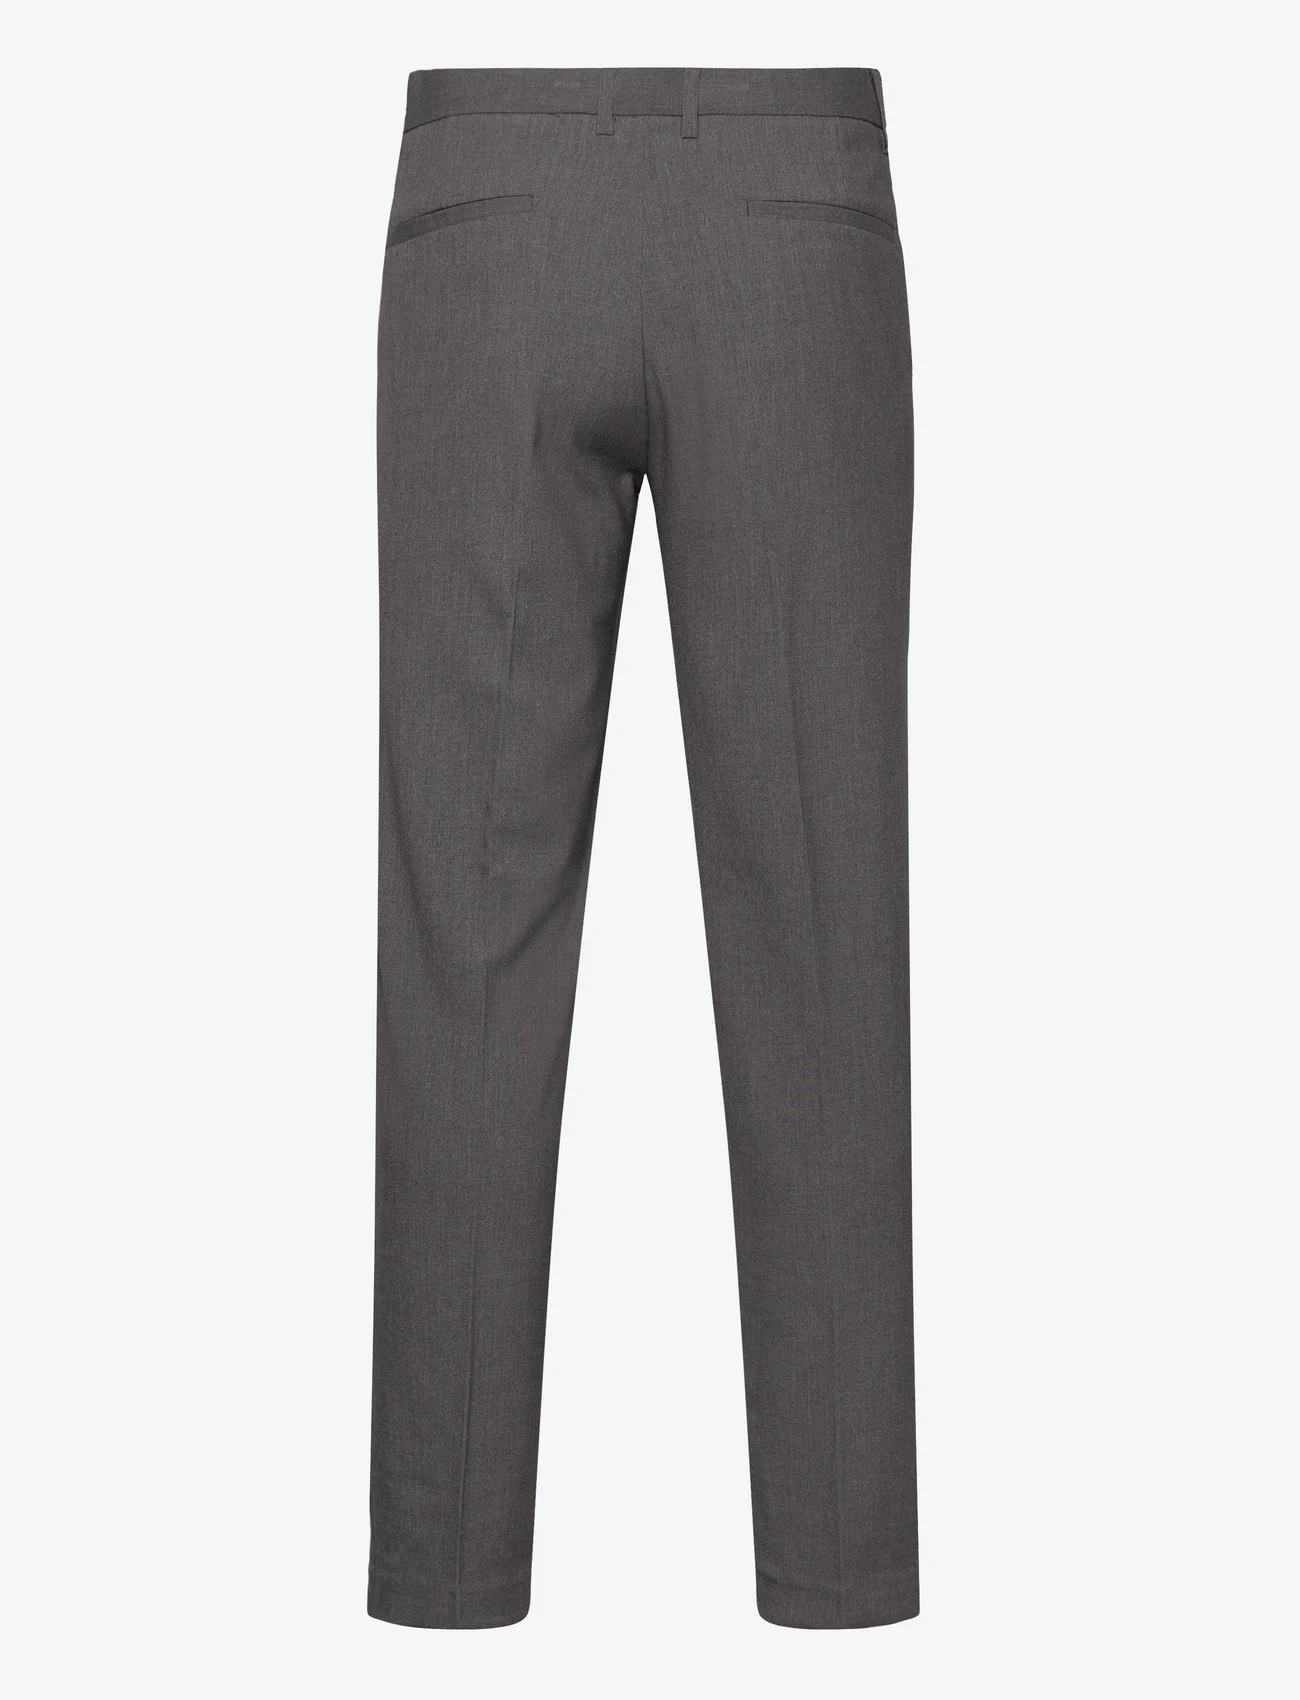 Lindbergh - Relaxed fit formal pants - kostymbyxor - grey mix - 1